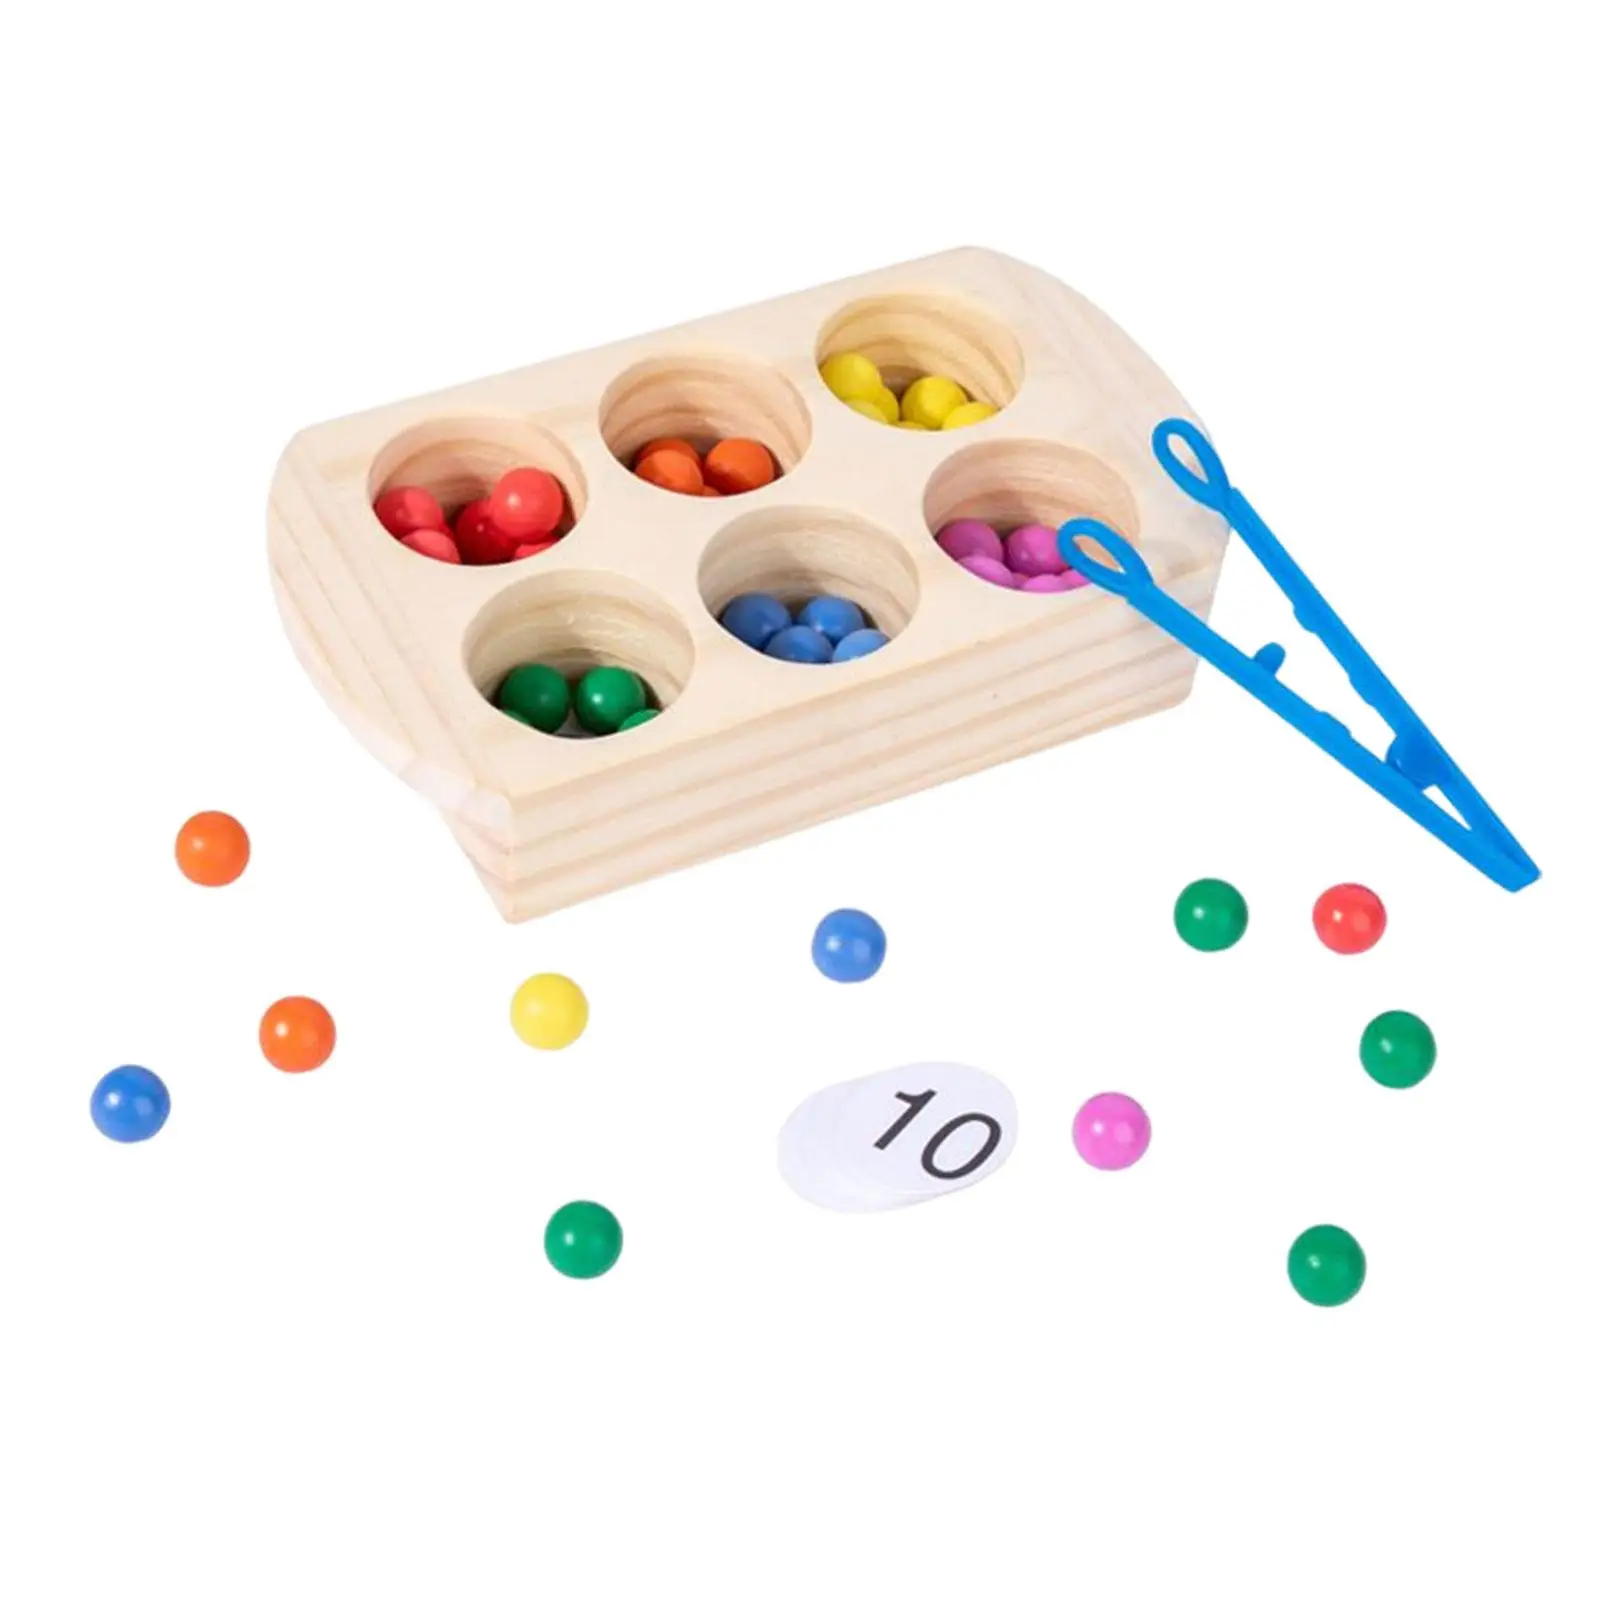 Wooden Clip Beads Board Game Wooden Board Bead montessori Toys for Puzzle Sorting Stack Counting toy Sorting Baby